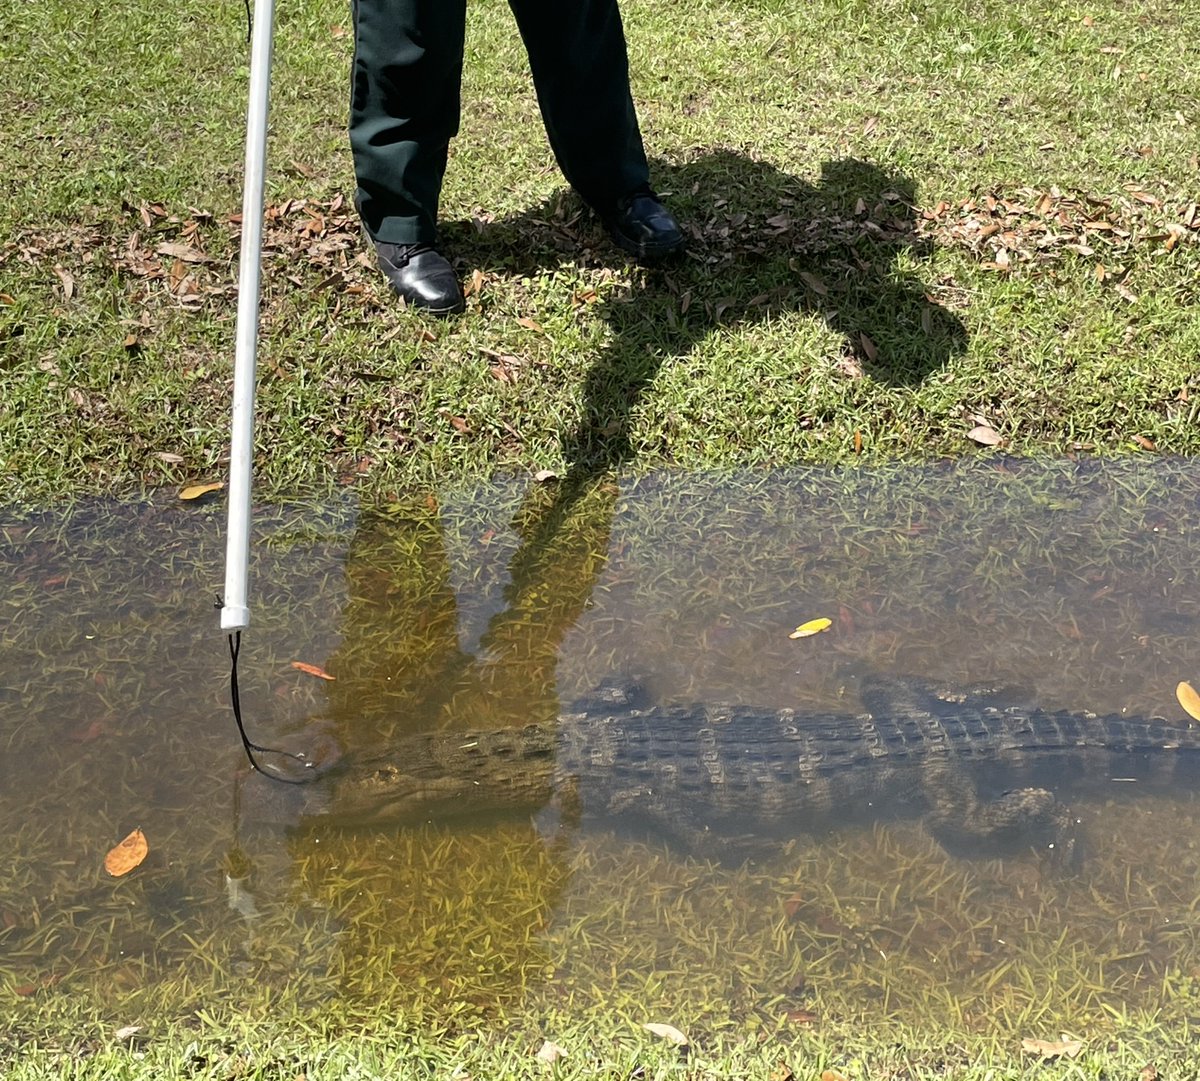 Yesterday, deputies responded to Shady Oaks Drive for a report of an alligator on someone's property. Deputy Ganey was able to wrangle the alligator and relocate him to a safe place. #OnlyinFlorida